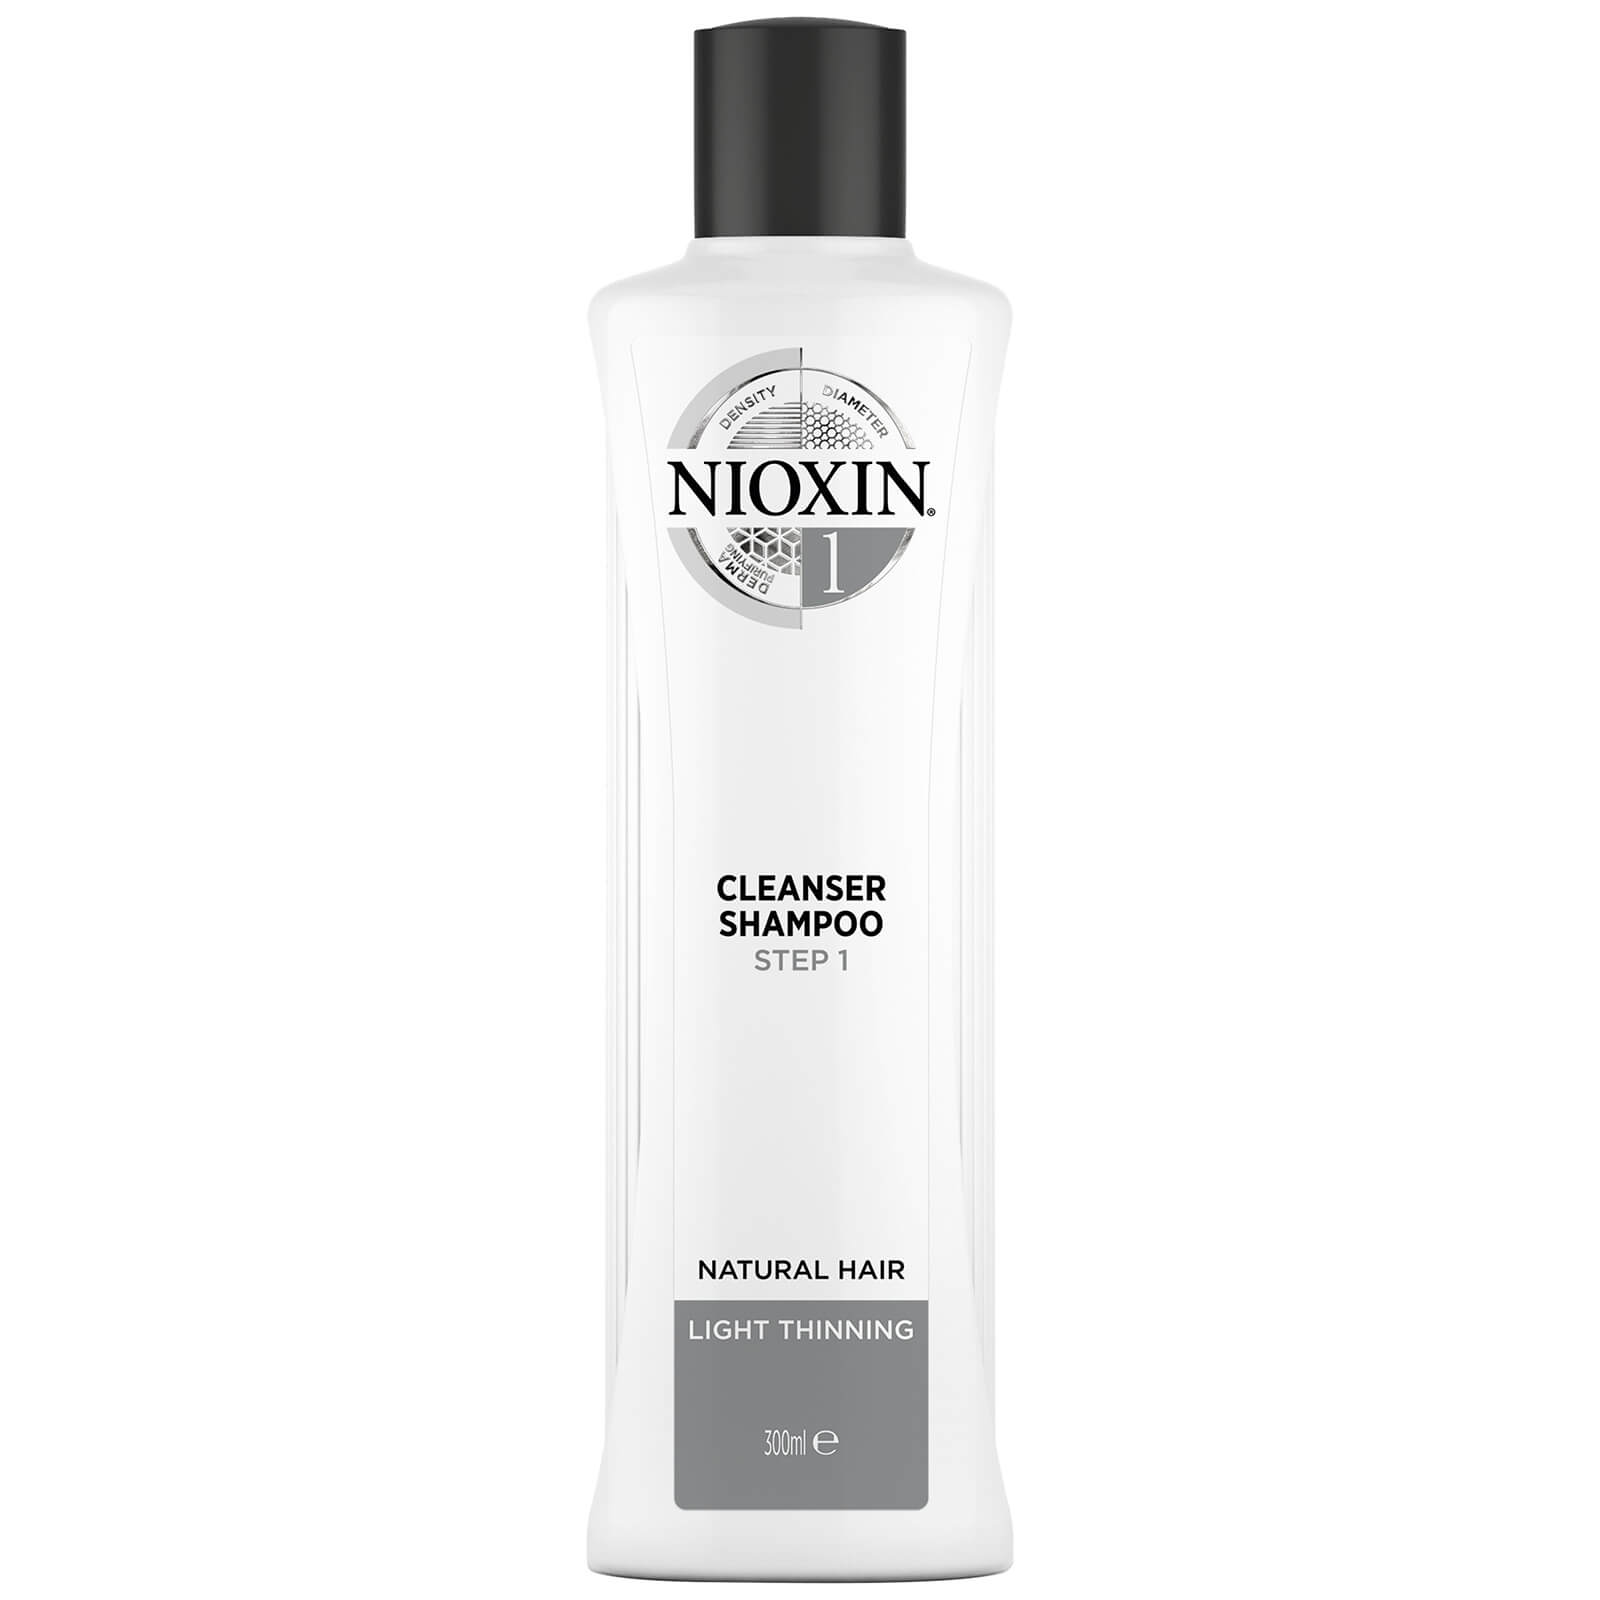 NIOXIN 3-Part System 1 Cleanser Shampoo for Natural Hair with Light Thinning 300ml